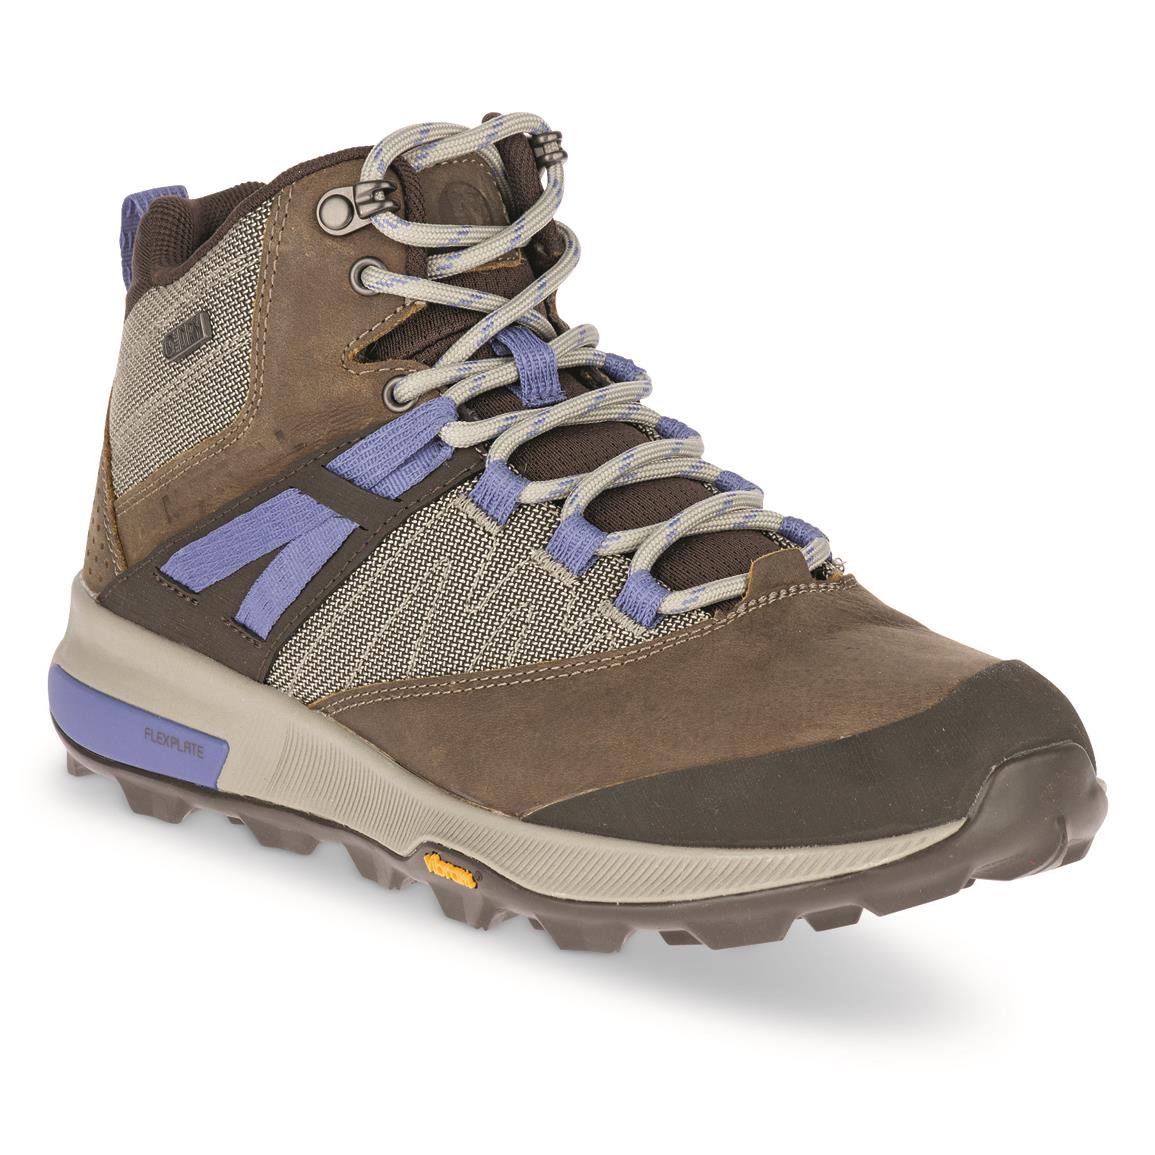 Merrell Women's Hiking Boots Clearance | IUCN Water